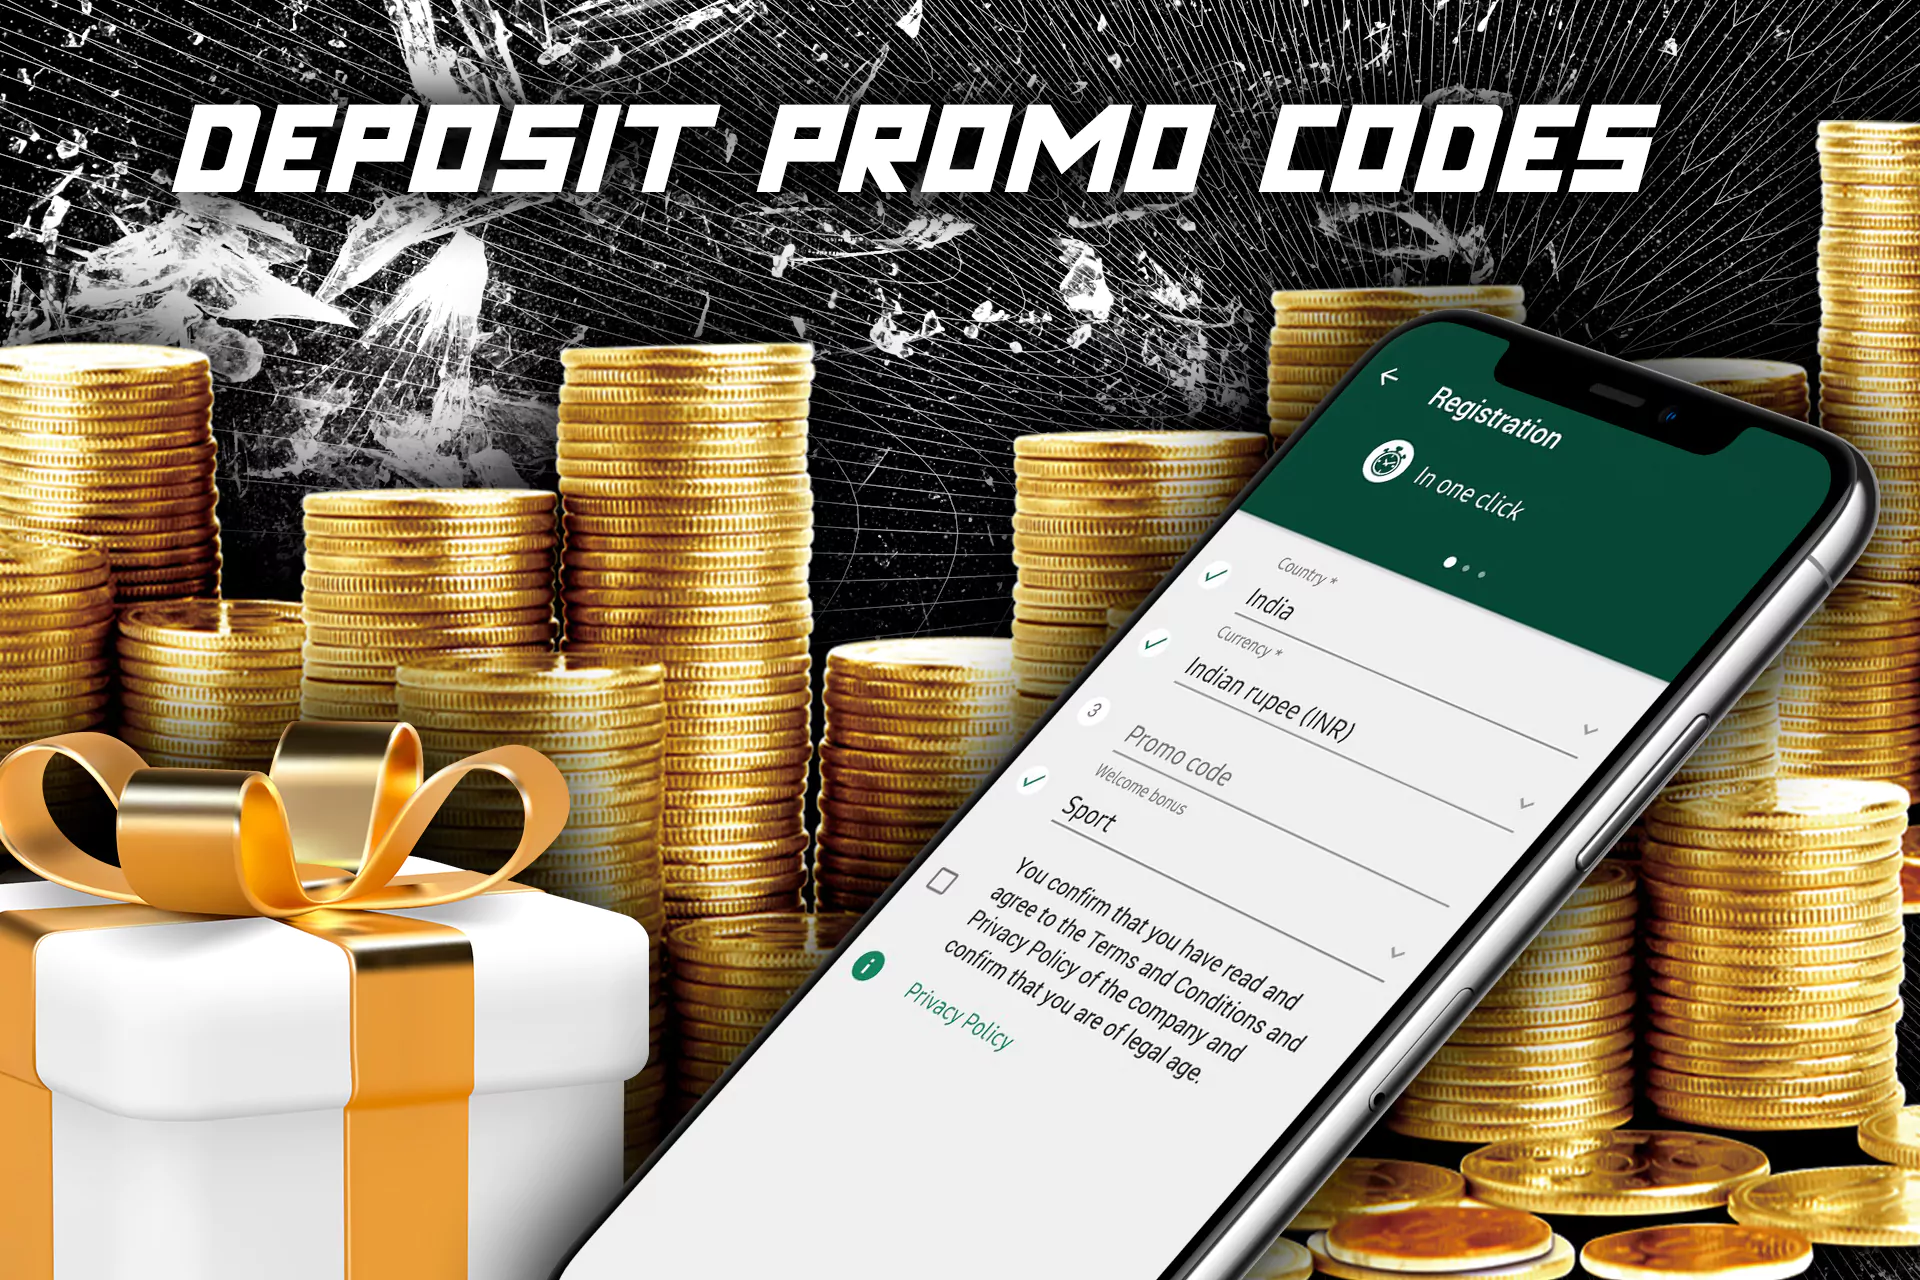 Deposit promo codes for cricket and sports betting.